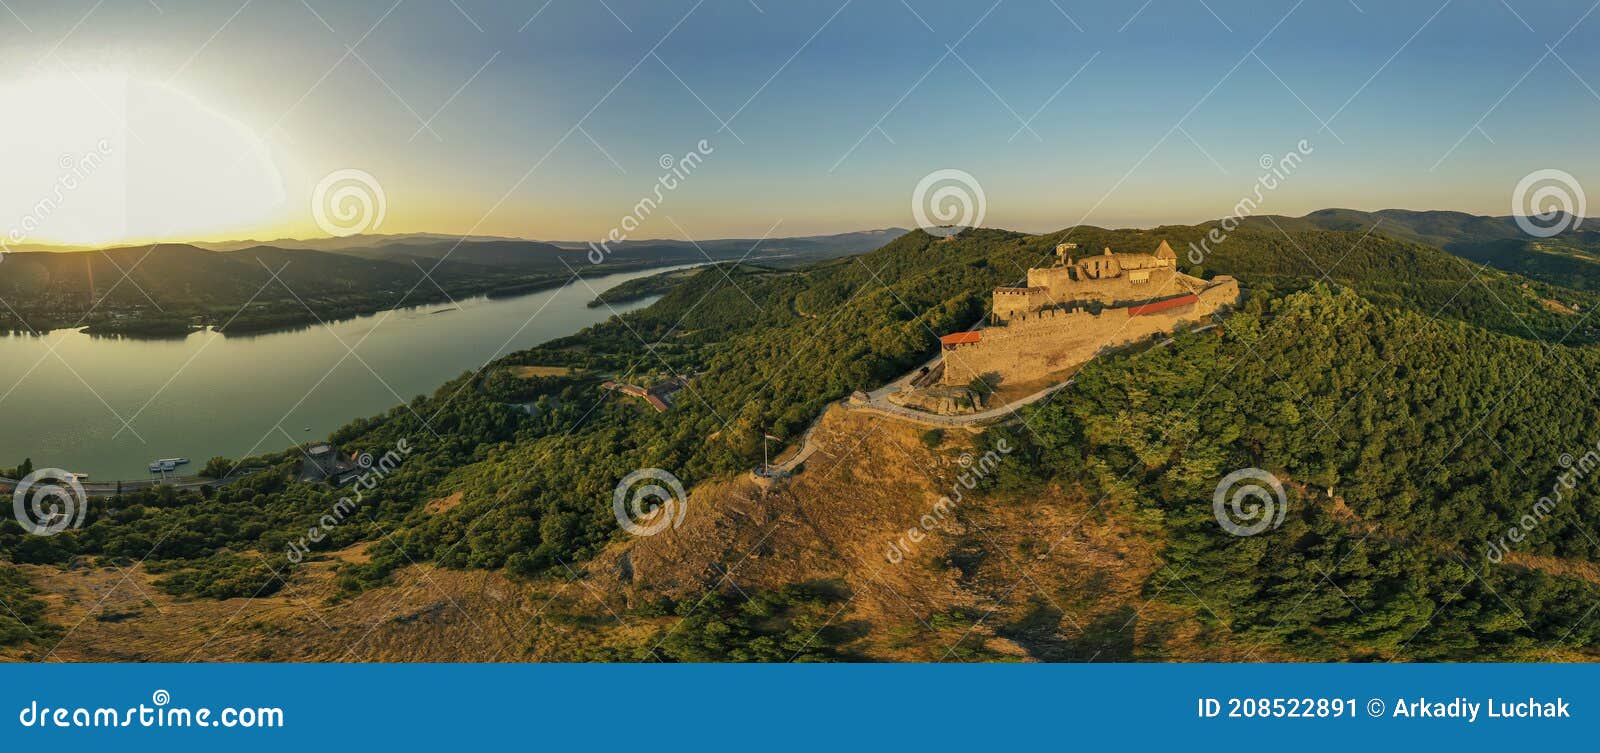 The Upper Castle and Danube River in Visegrad Hungary. Drone Footage Evening Time Stock Image - Image of castle, sights: